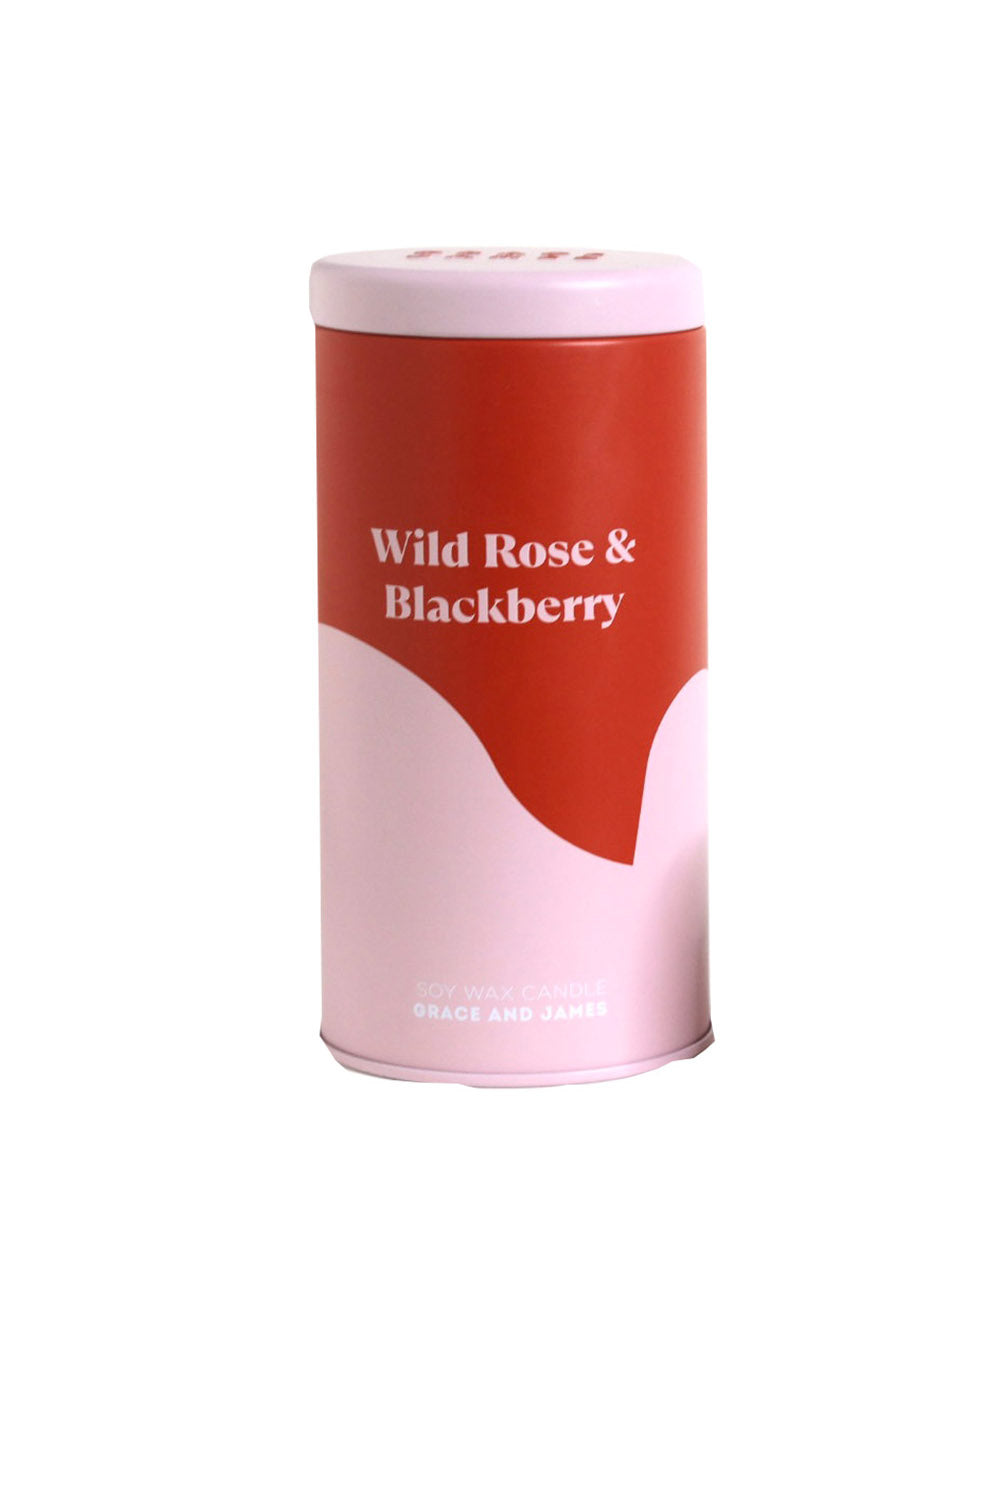 Bloom - Wild Rose & Blackberry 70 Hour Candle